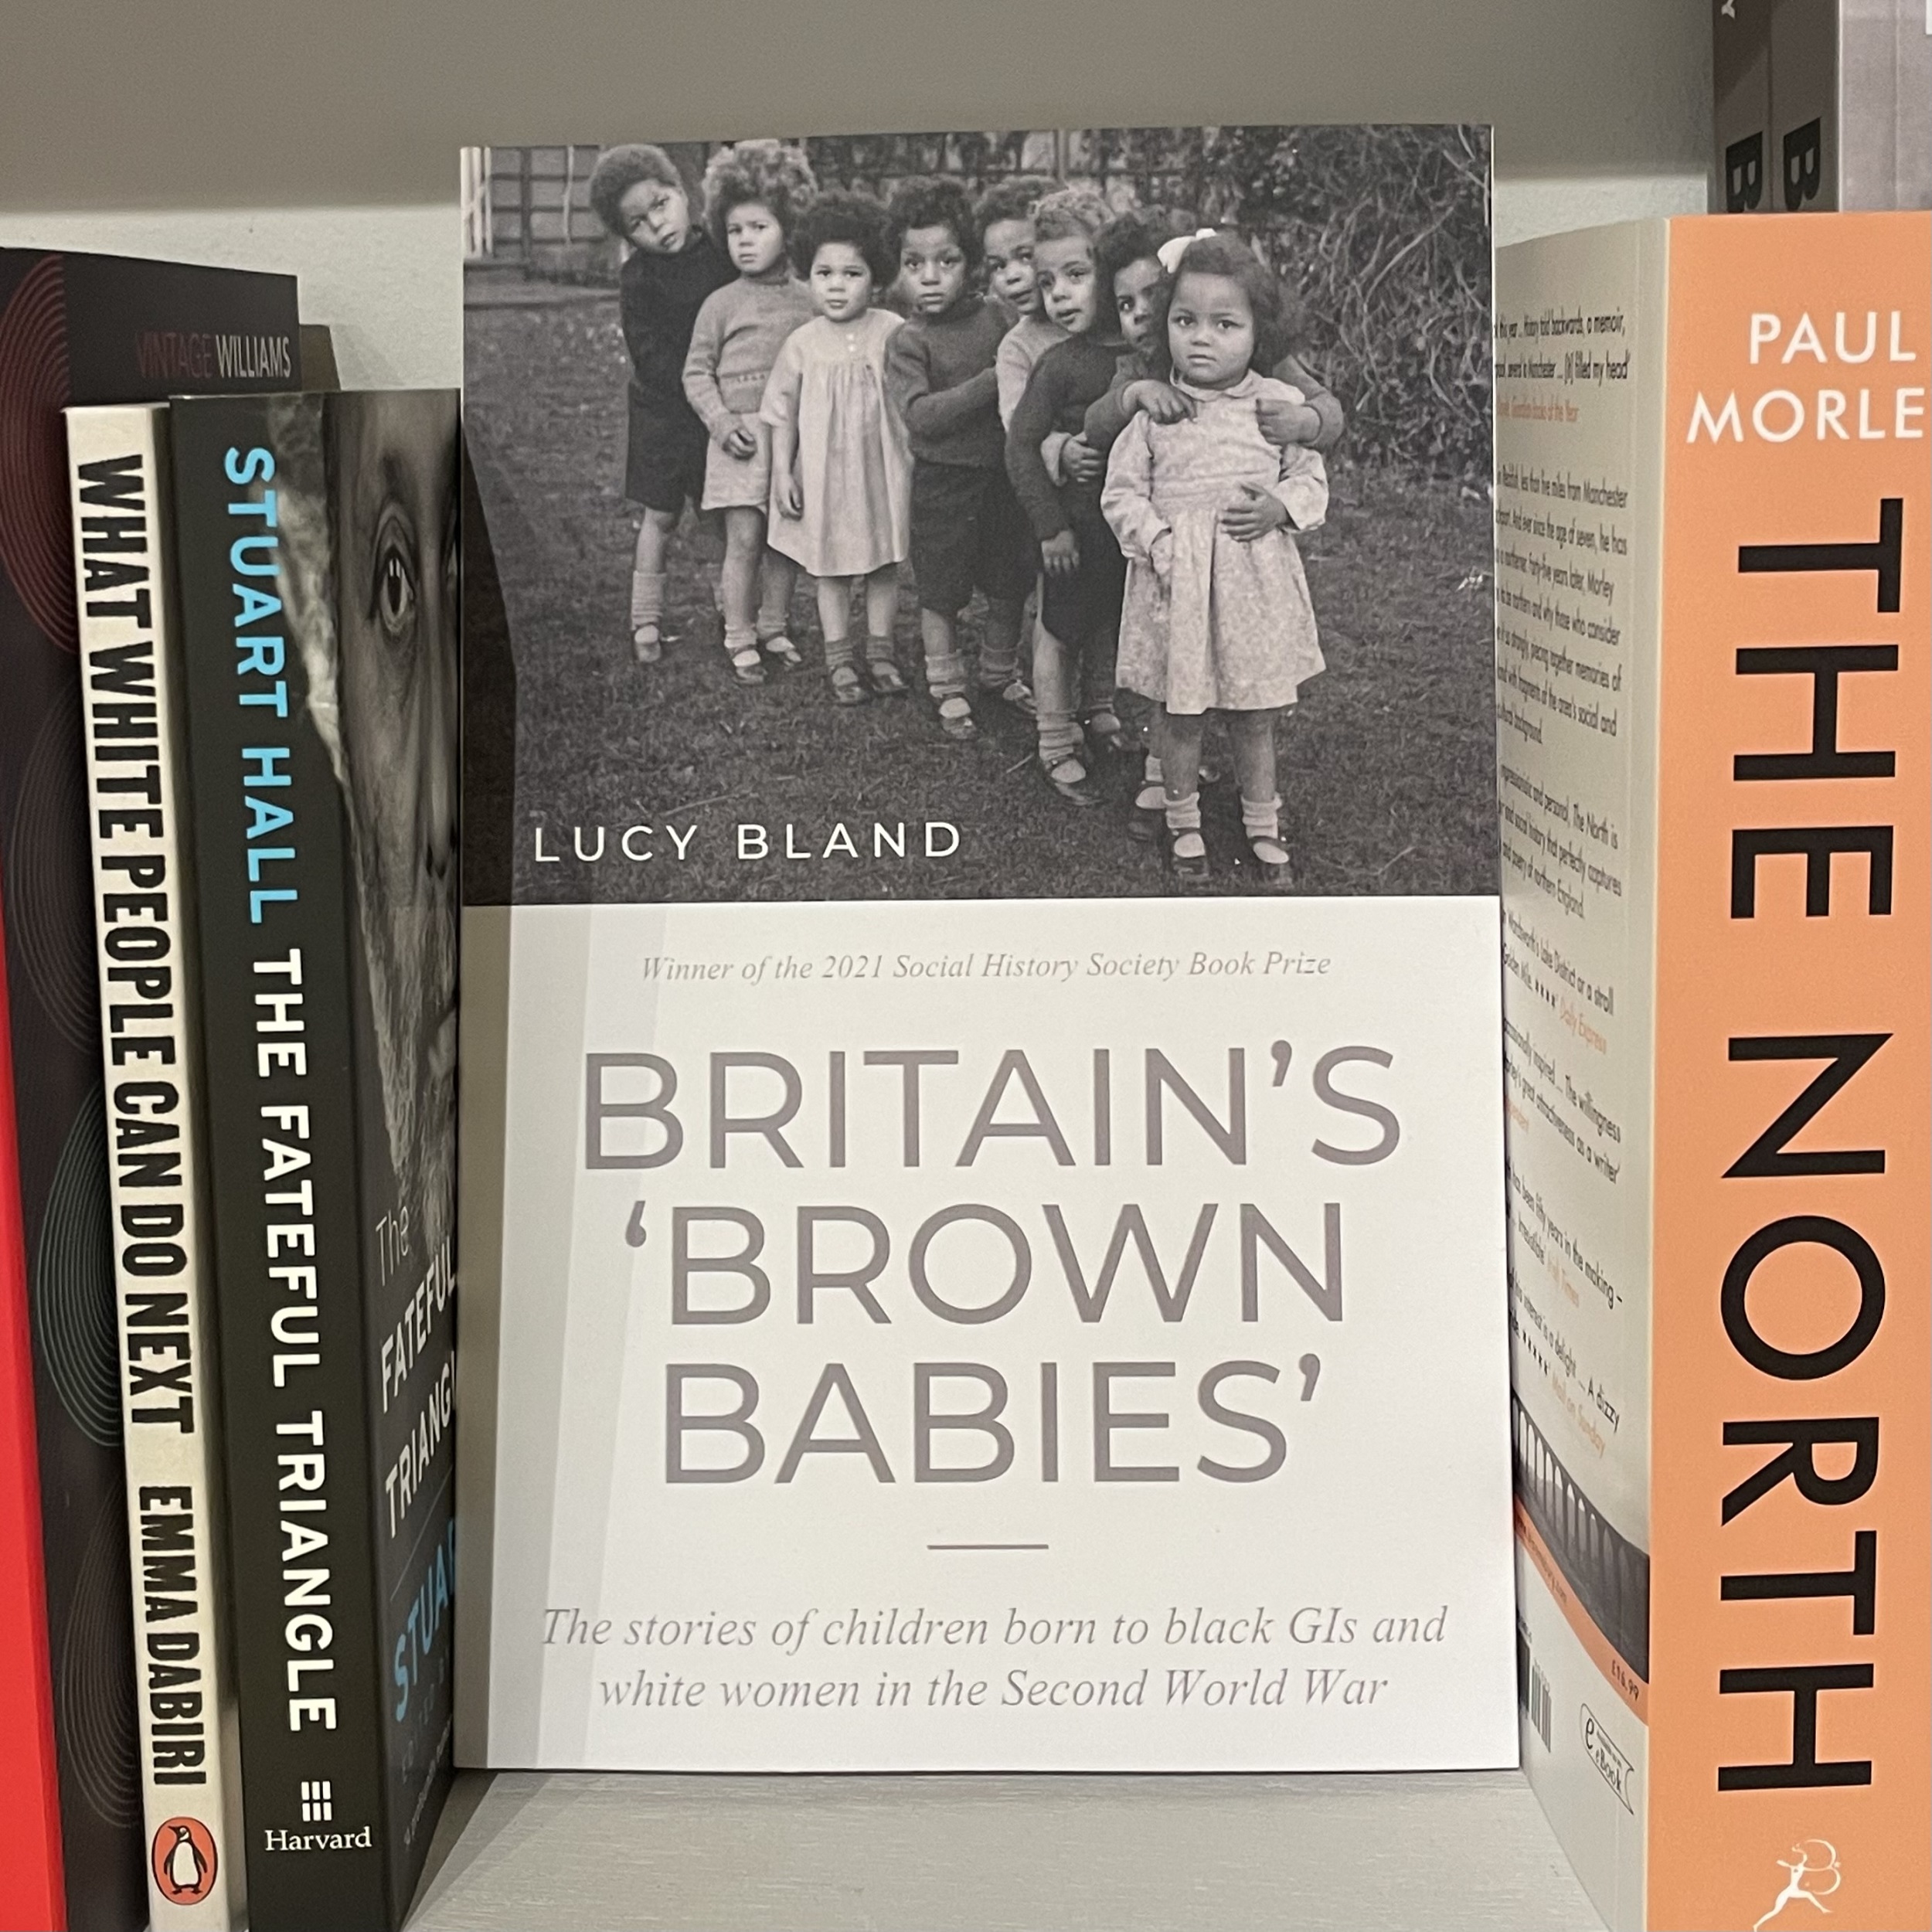 <p><em>Britain’s ‘brown babies’: The stories of children born to black GIs and white women in the Second World War</em> by Lucy Bland<br />
Image: South London Gallery Bookshop, 2022.</p>
